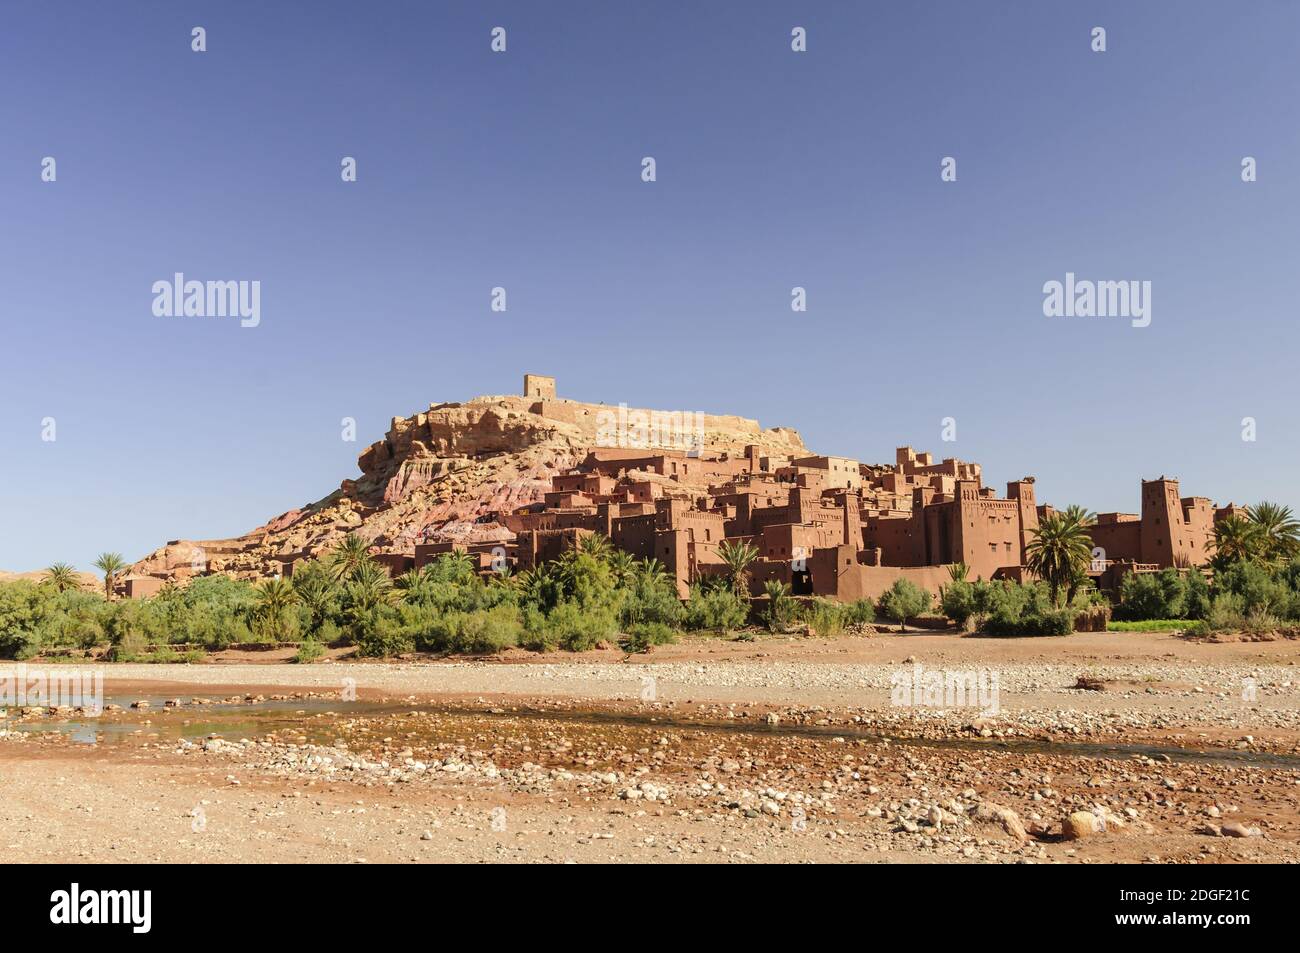 The Kasbahs of Ait Ben Haddou in the south of Morocco, Africa. Stock Photo